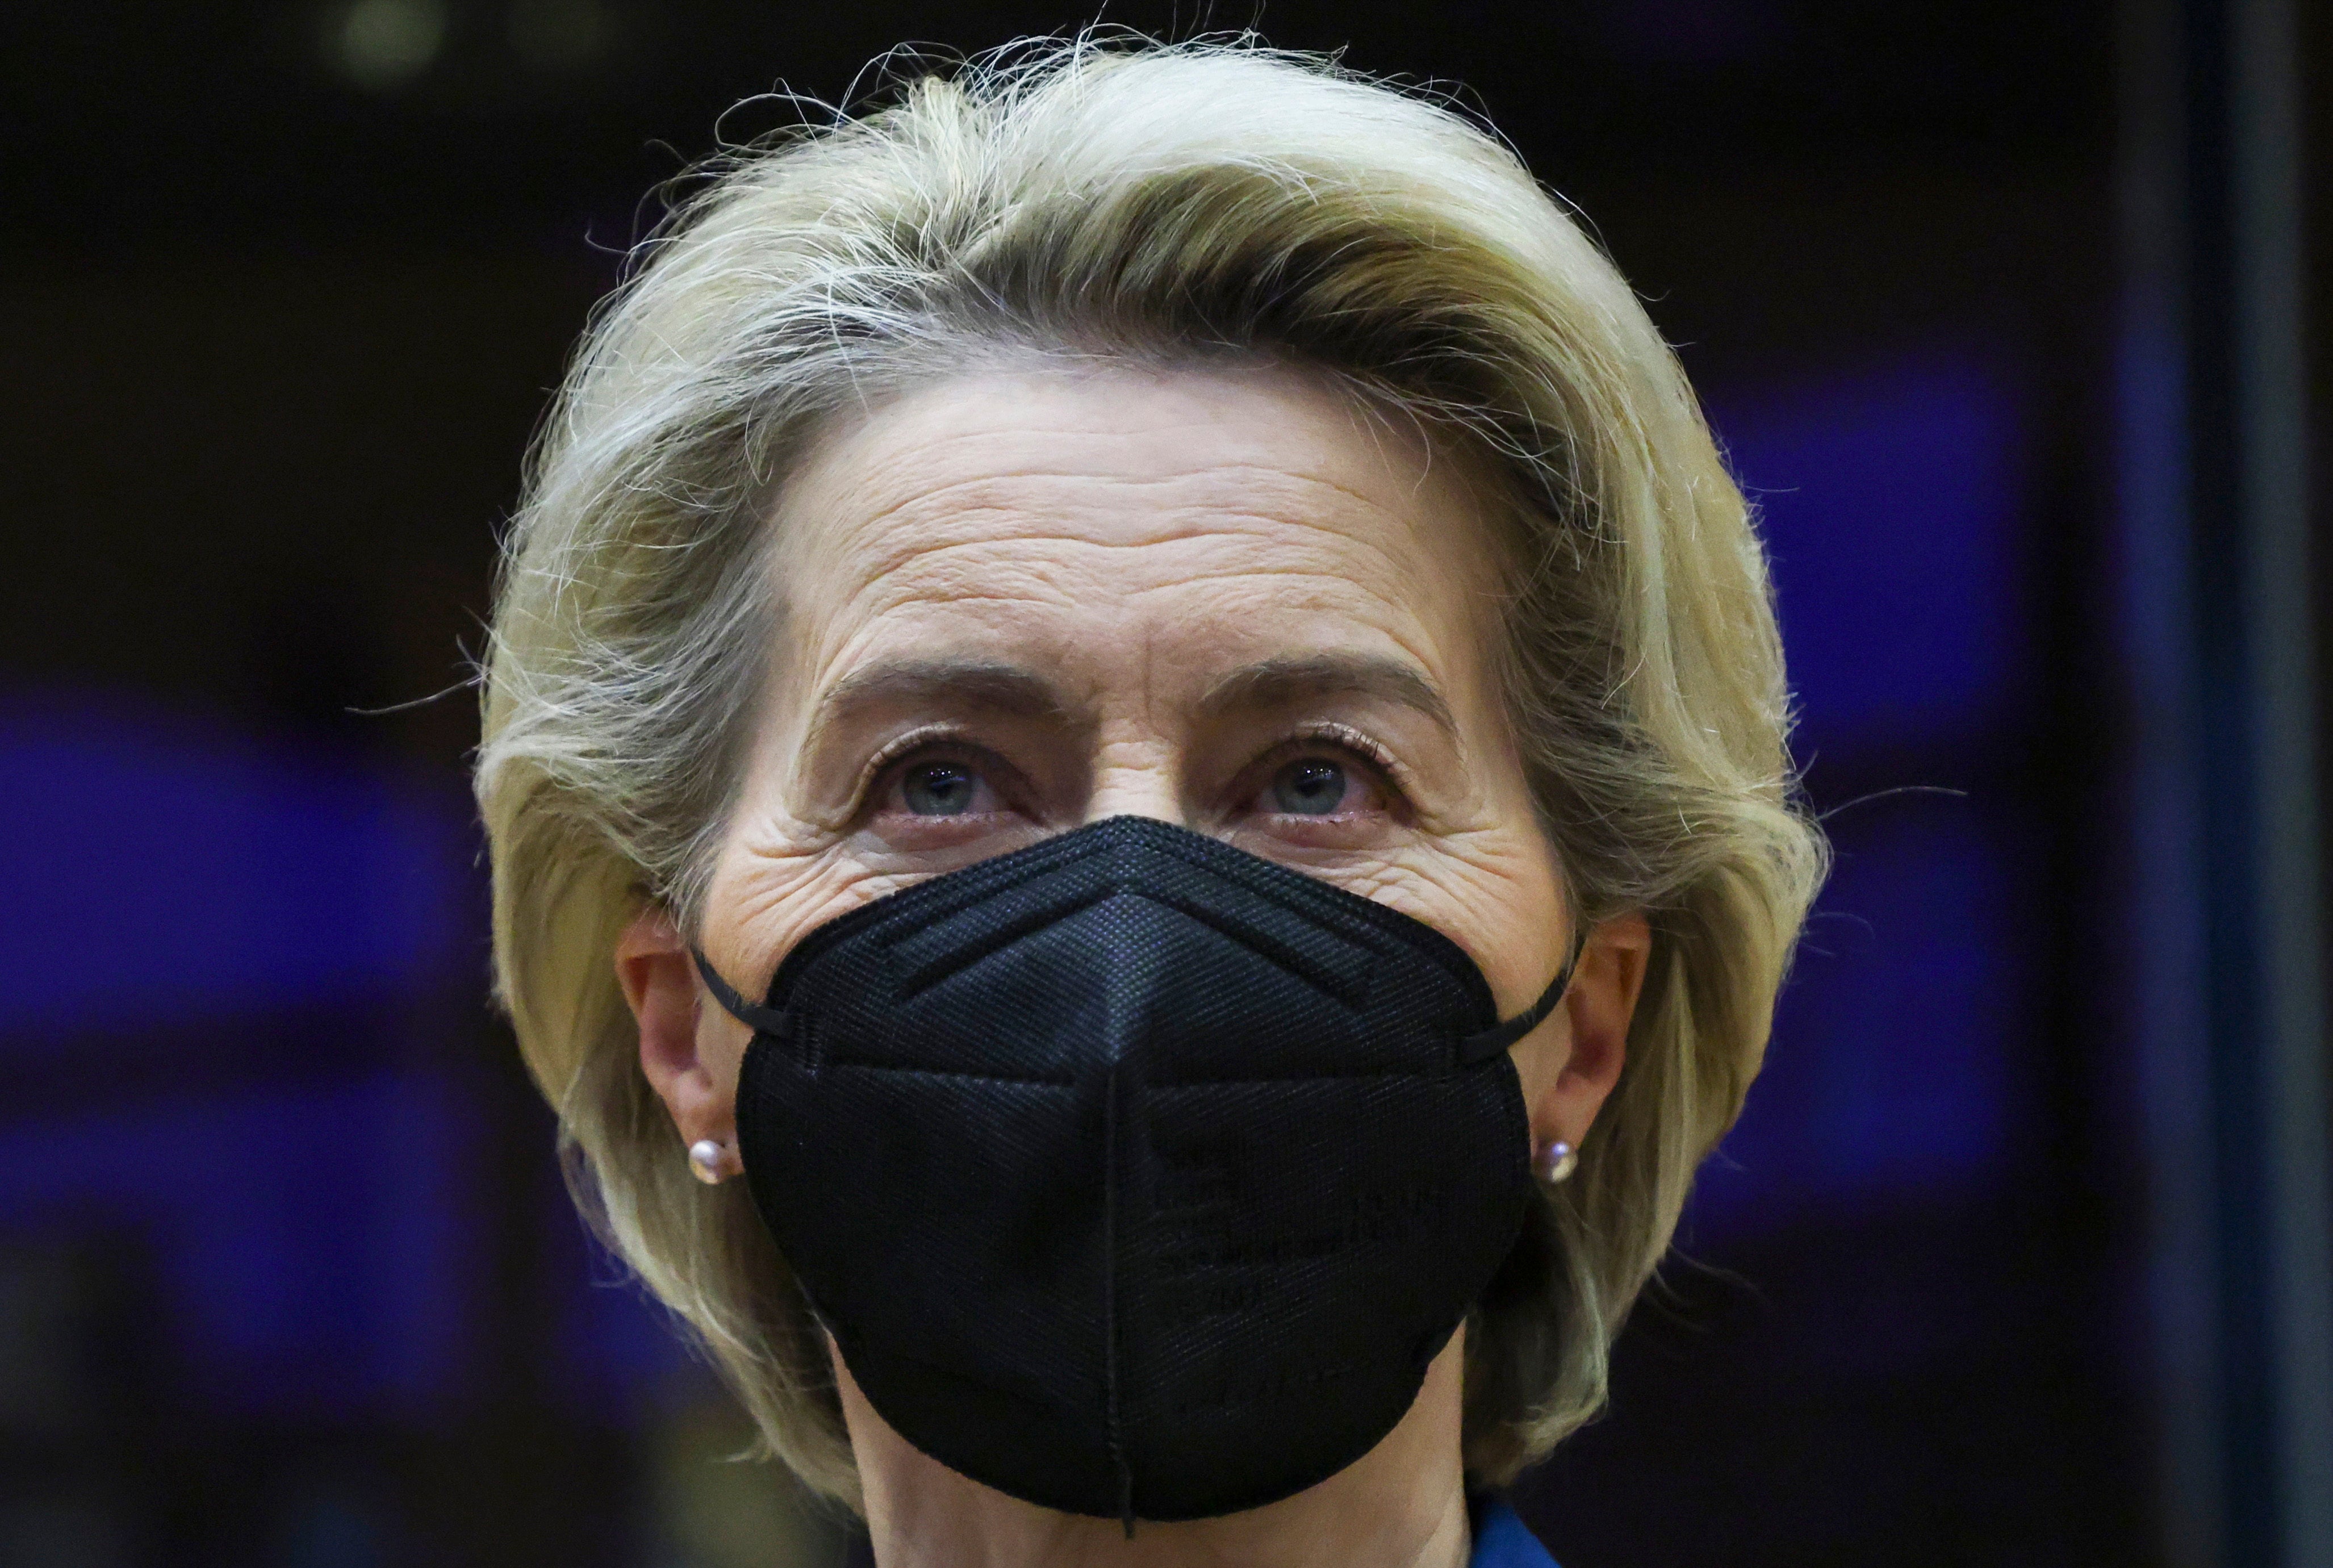 In an interview in April, von der Leyen revealed she had exchanged texts with Bourla for a month when they were negotiating a vaccine contract.